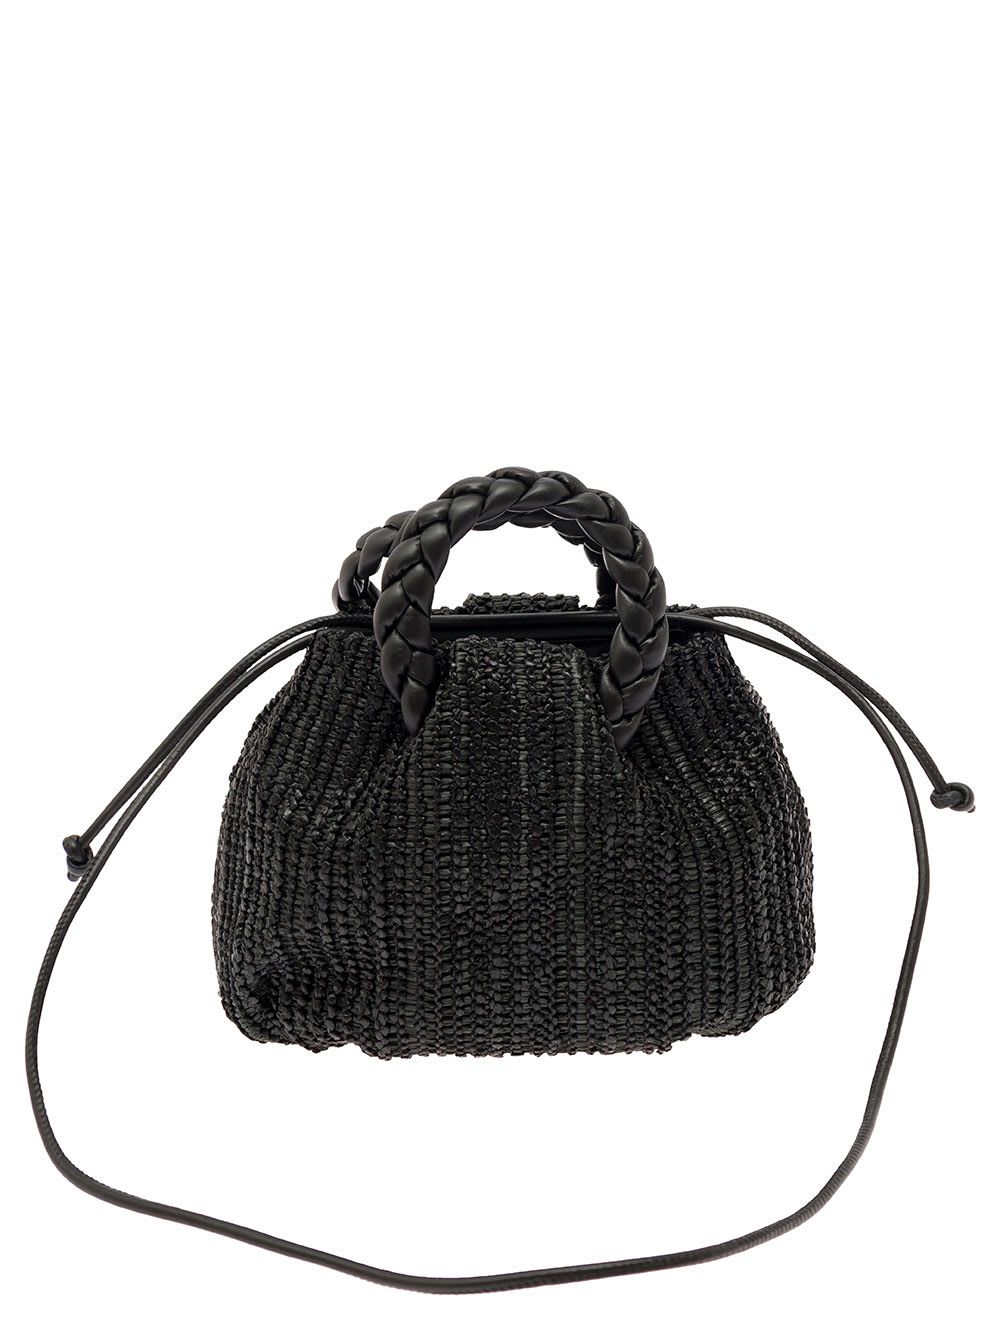 Shop Hereu Woven Bombon Black Handbag With Braided Handles In Woven Leather Woman